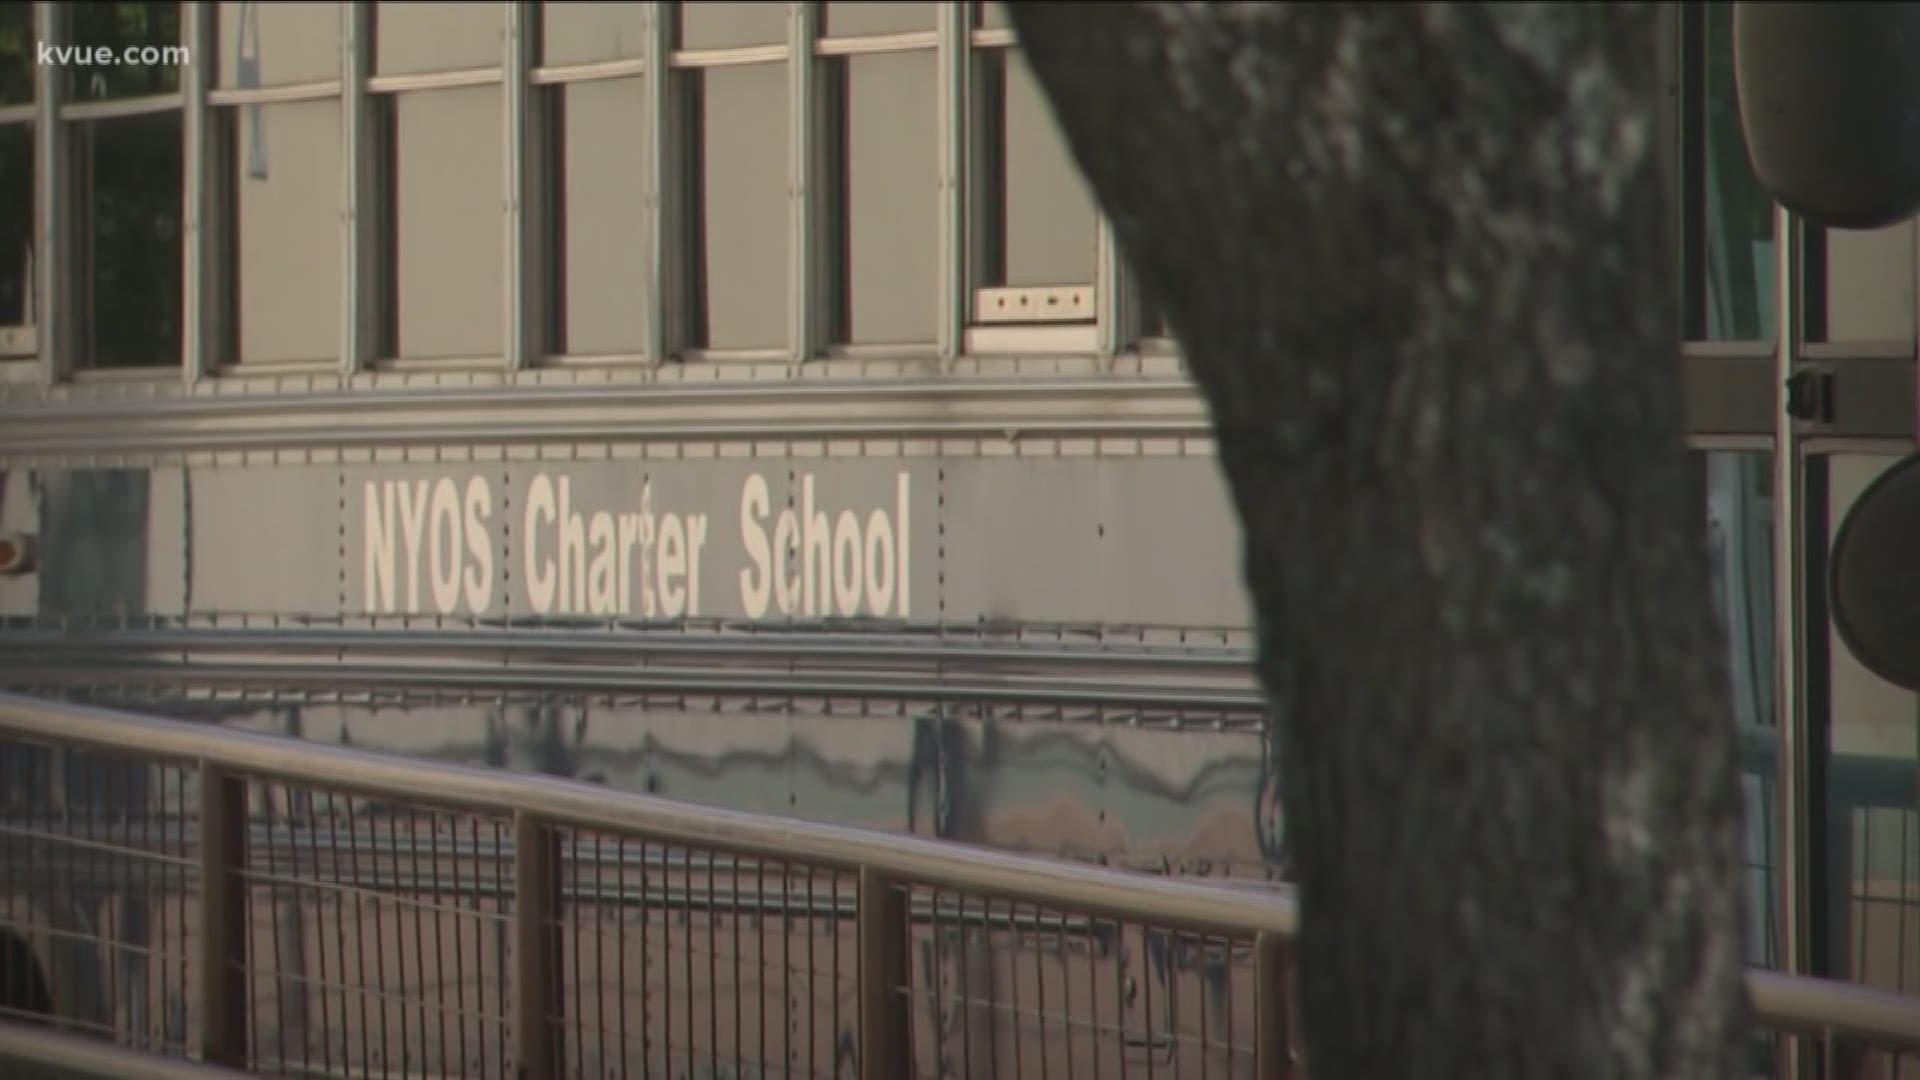 An Austin charter school is investigating a threat made against one of its campuses over the weekend.